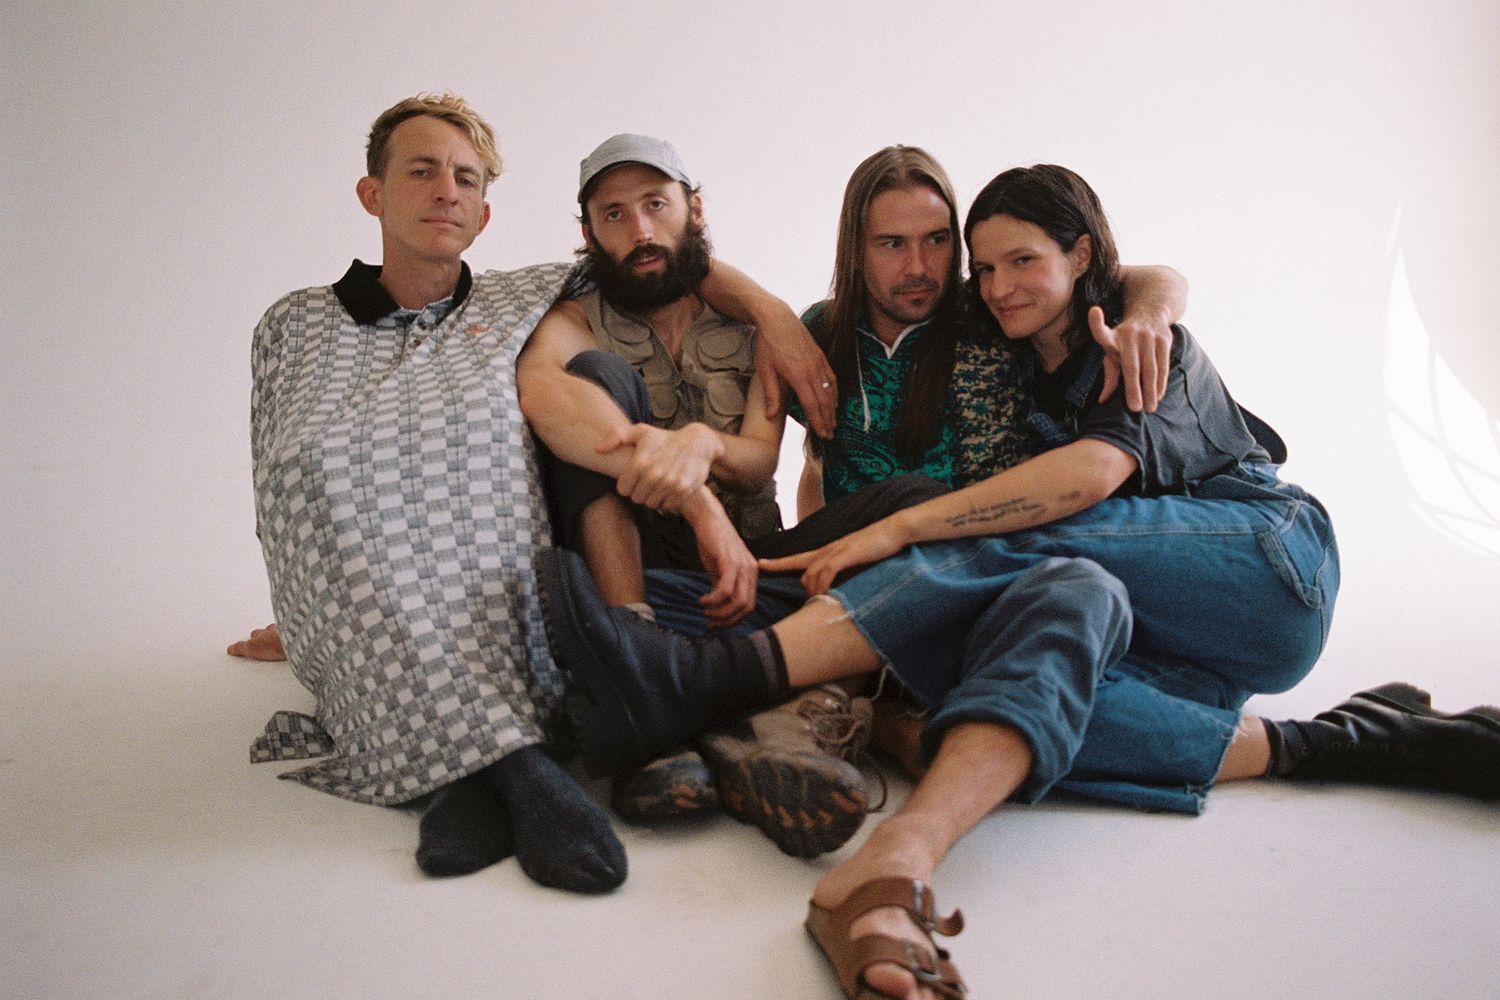 Big Thief unveil new song 'Change'